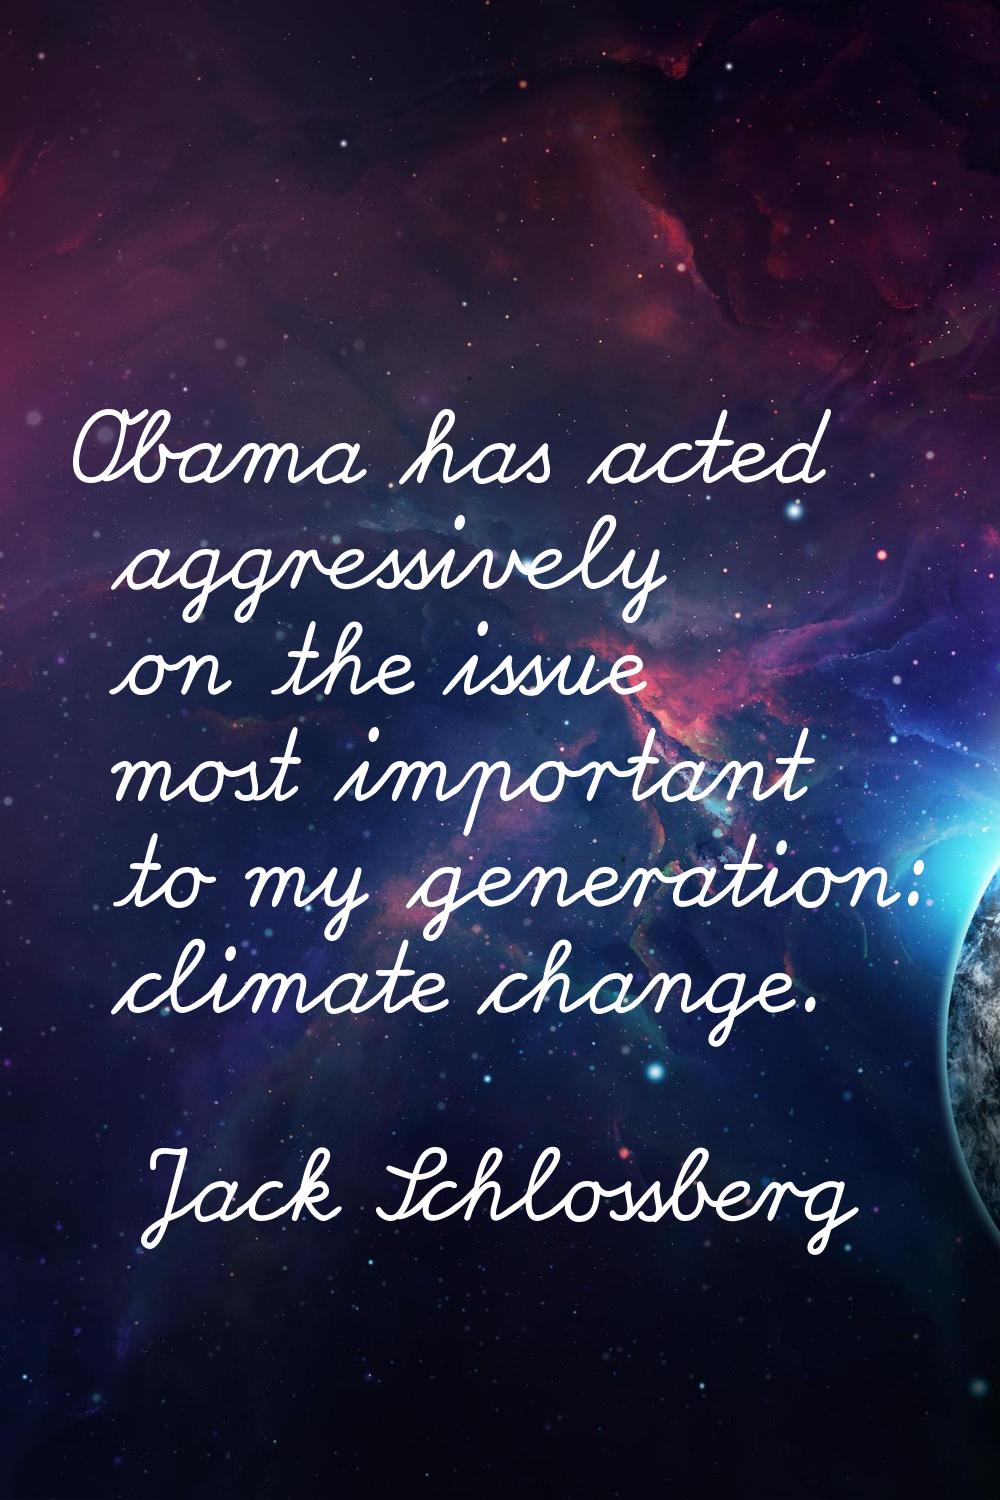 Obama has acted aggressively on the issue most important to my generation: climate change.